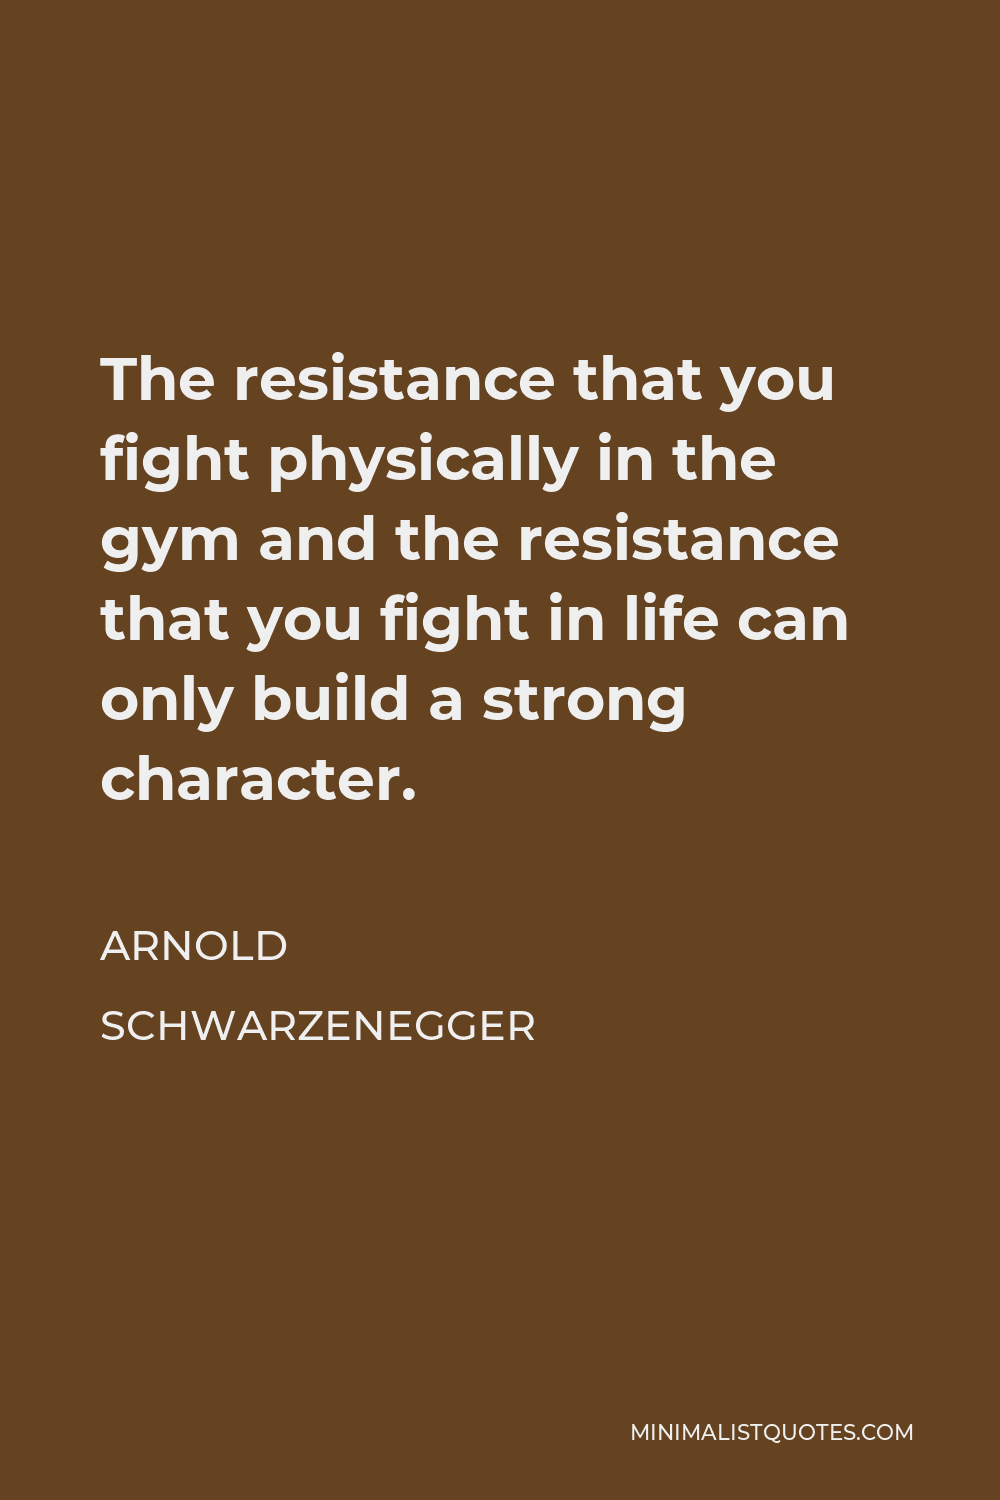 Arnold Schwarzenegger Quote - The resistance that you fight physically in the gym and the resistance that you fight in life can only build a strong character.